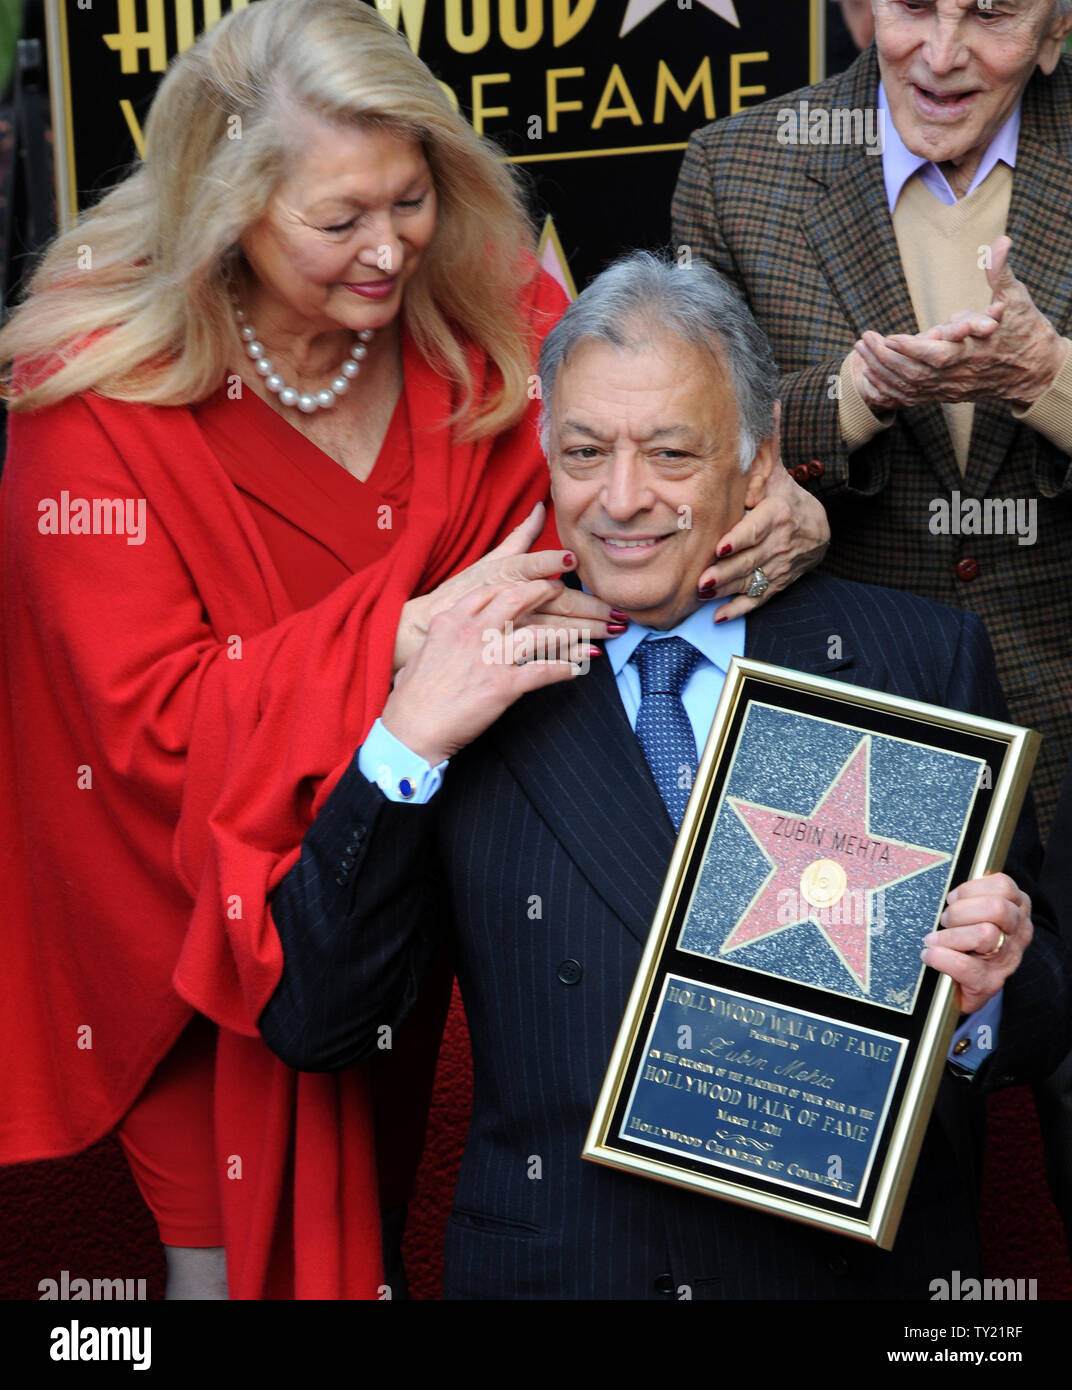 International orchestral and operatic conductor Zubin Mehta (C) is hugged by his wife Nancy (L) during ceremonies honoring Mehta with the 2,434th star on the Hollywood Walk of Fame in Los Angeles on March 1, 2011. Members of the Los Angeles, Israel and Vienna Philharmonic Orchestras performed at the event.  UPI/Jim Ruymen Stock Photo